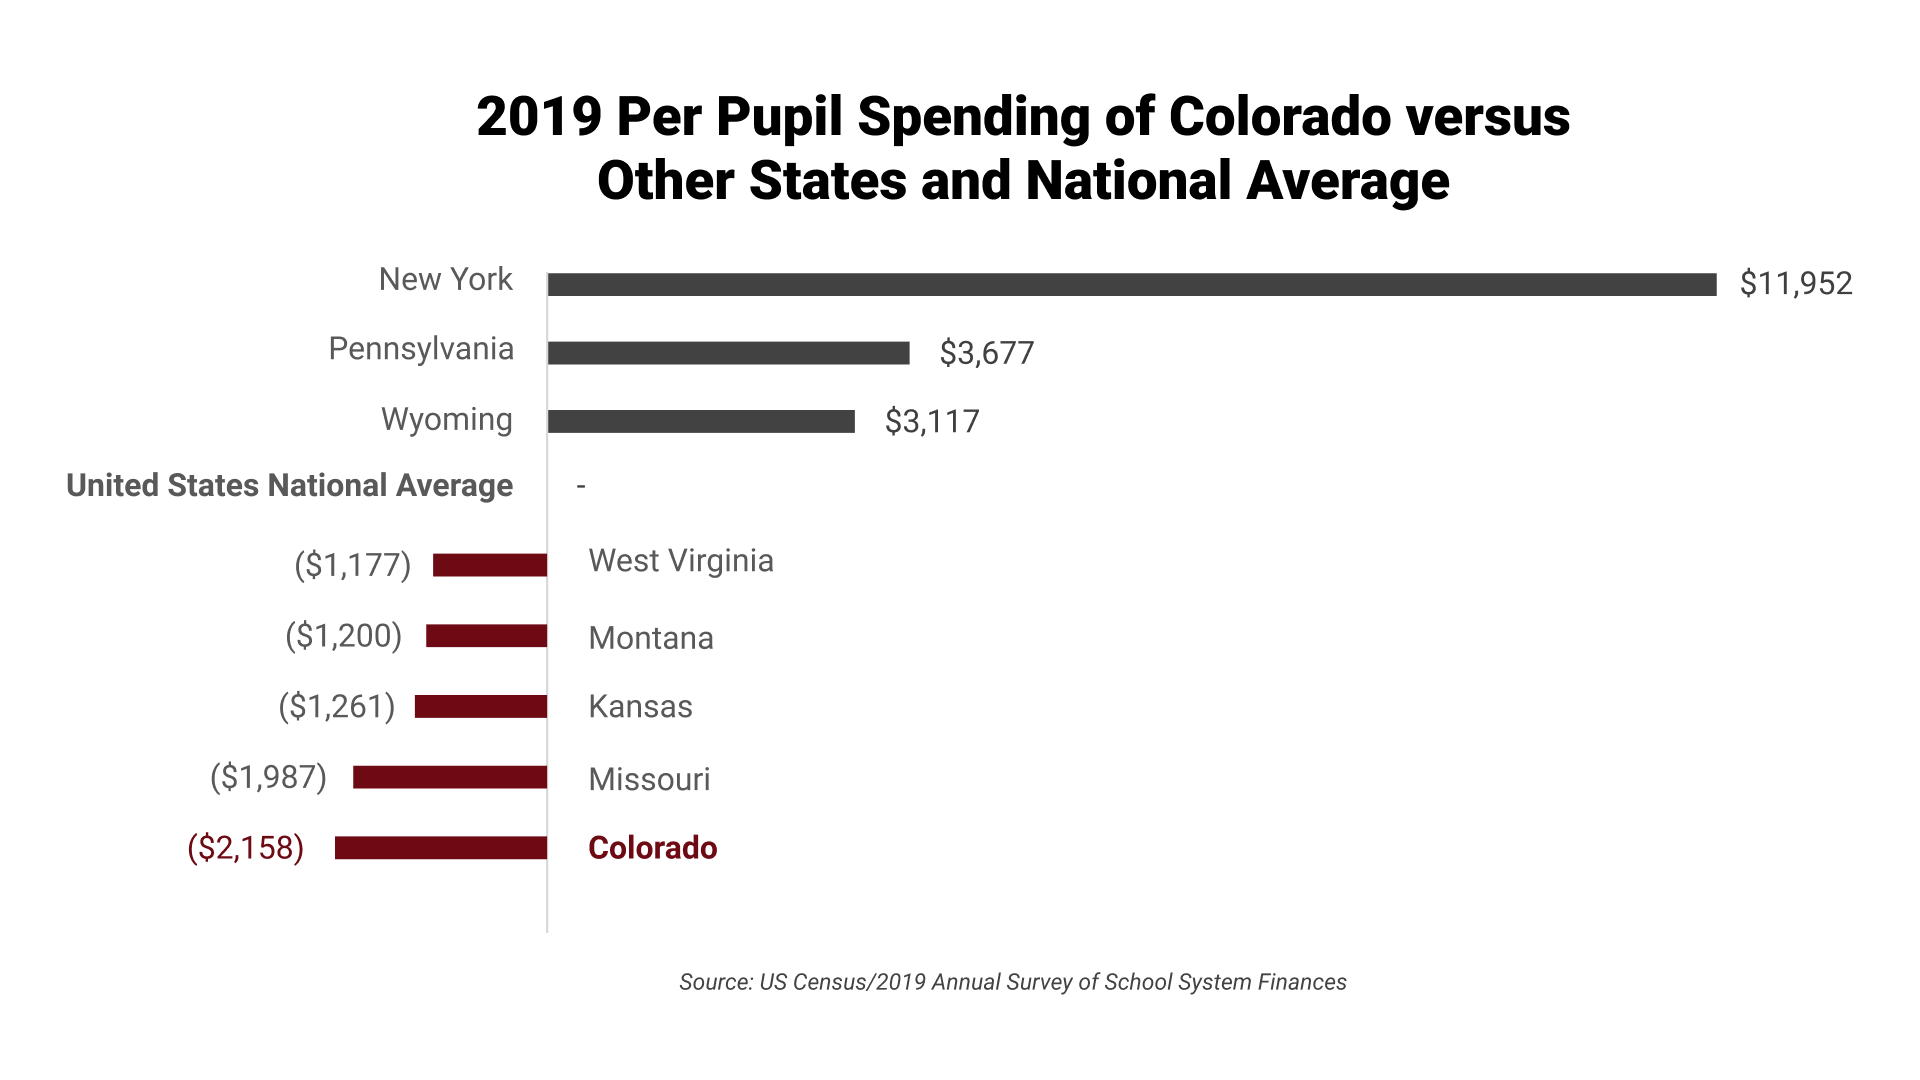 Bar chart showing per pupil spending for Colorado compared to the national average and other states